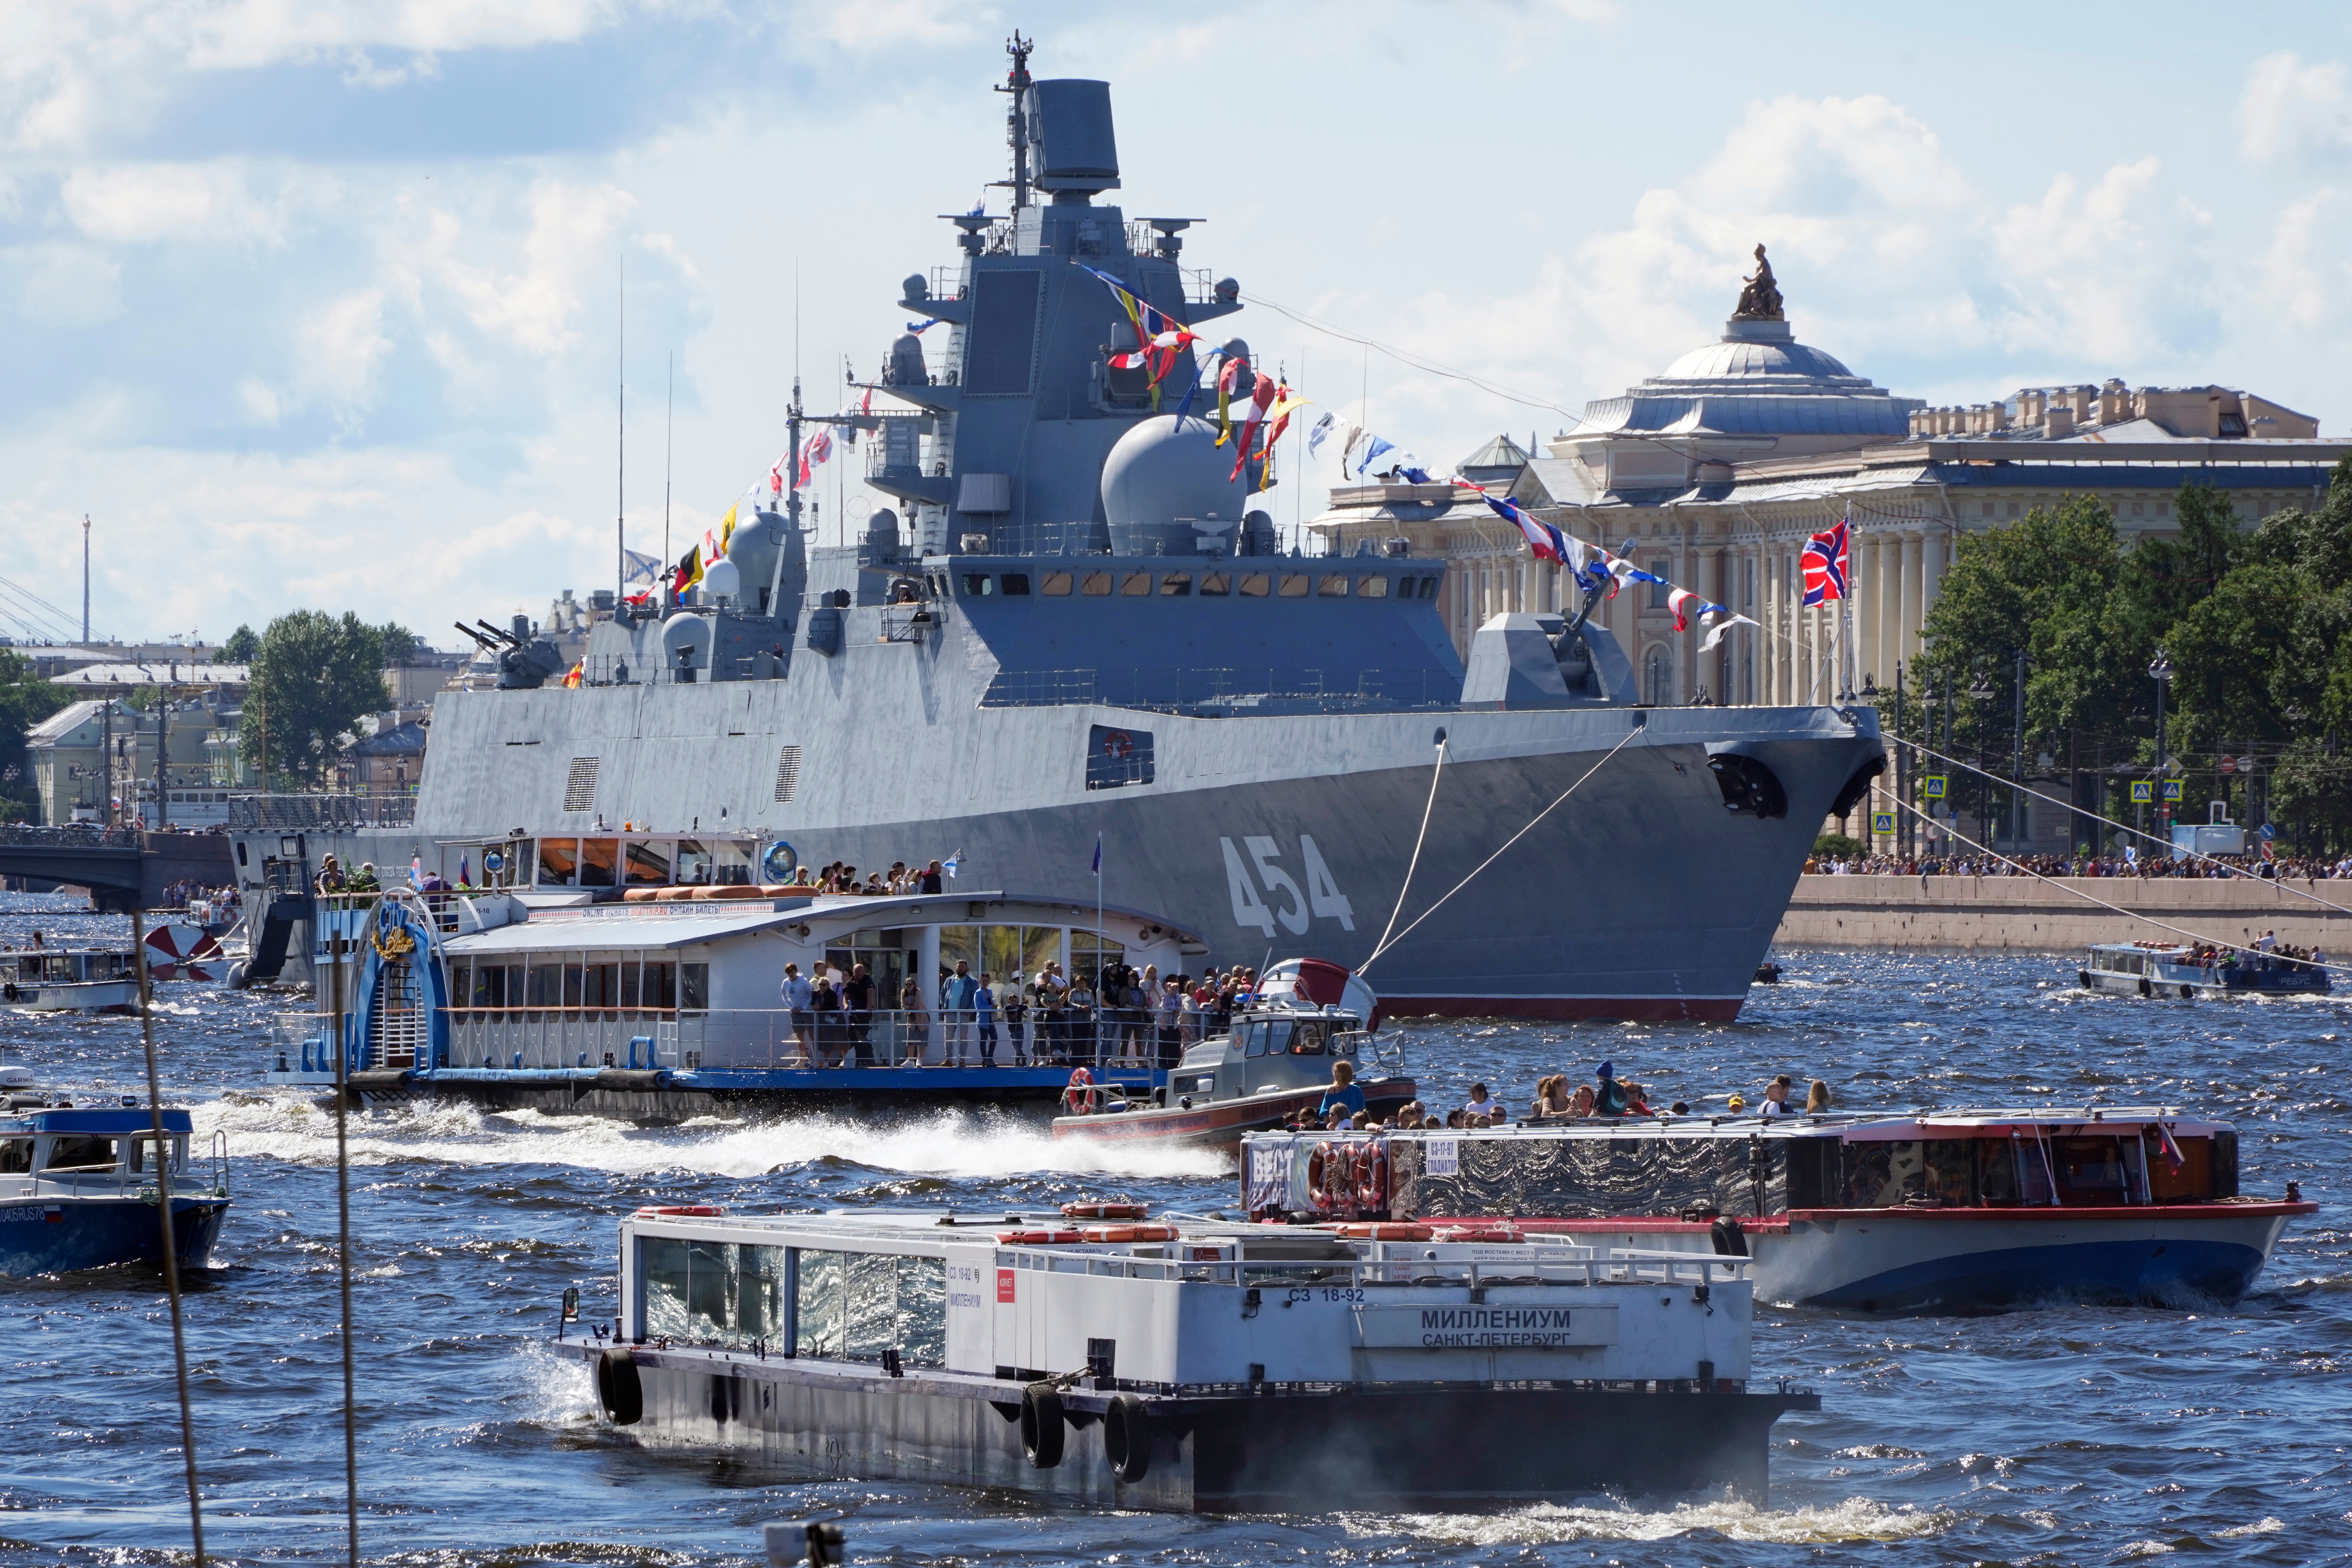 The Russian frigate ‘Admiral Gorshkov’ before it was deployed on its current mission